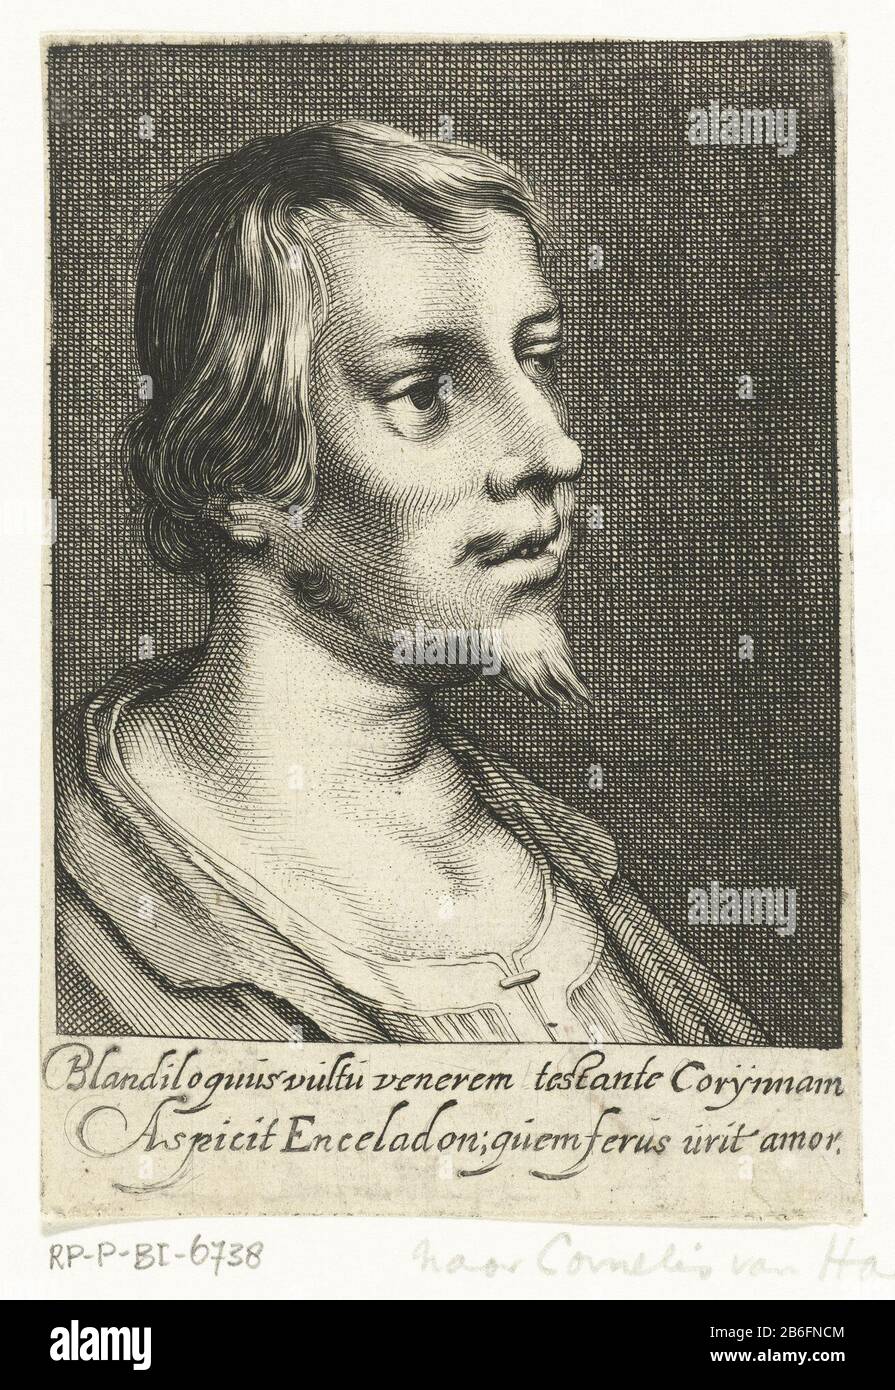 Bust of young man RP-P-BI-6738 Bust of young man with a margin of two lines of Latin tekst. Manufacturer : printmaker: Cornelis van Dalen (I) Date: 1612 - 1665 Physical characteristics: engra material: paper Technique: engra (printing process) Measurements: sheet: 119 mm × h b 83 mm Subject: adult man Stock Photo